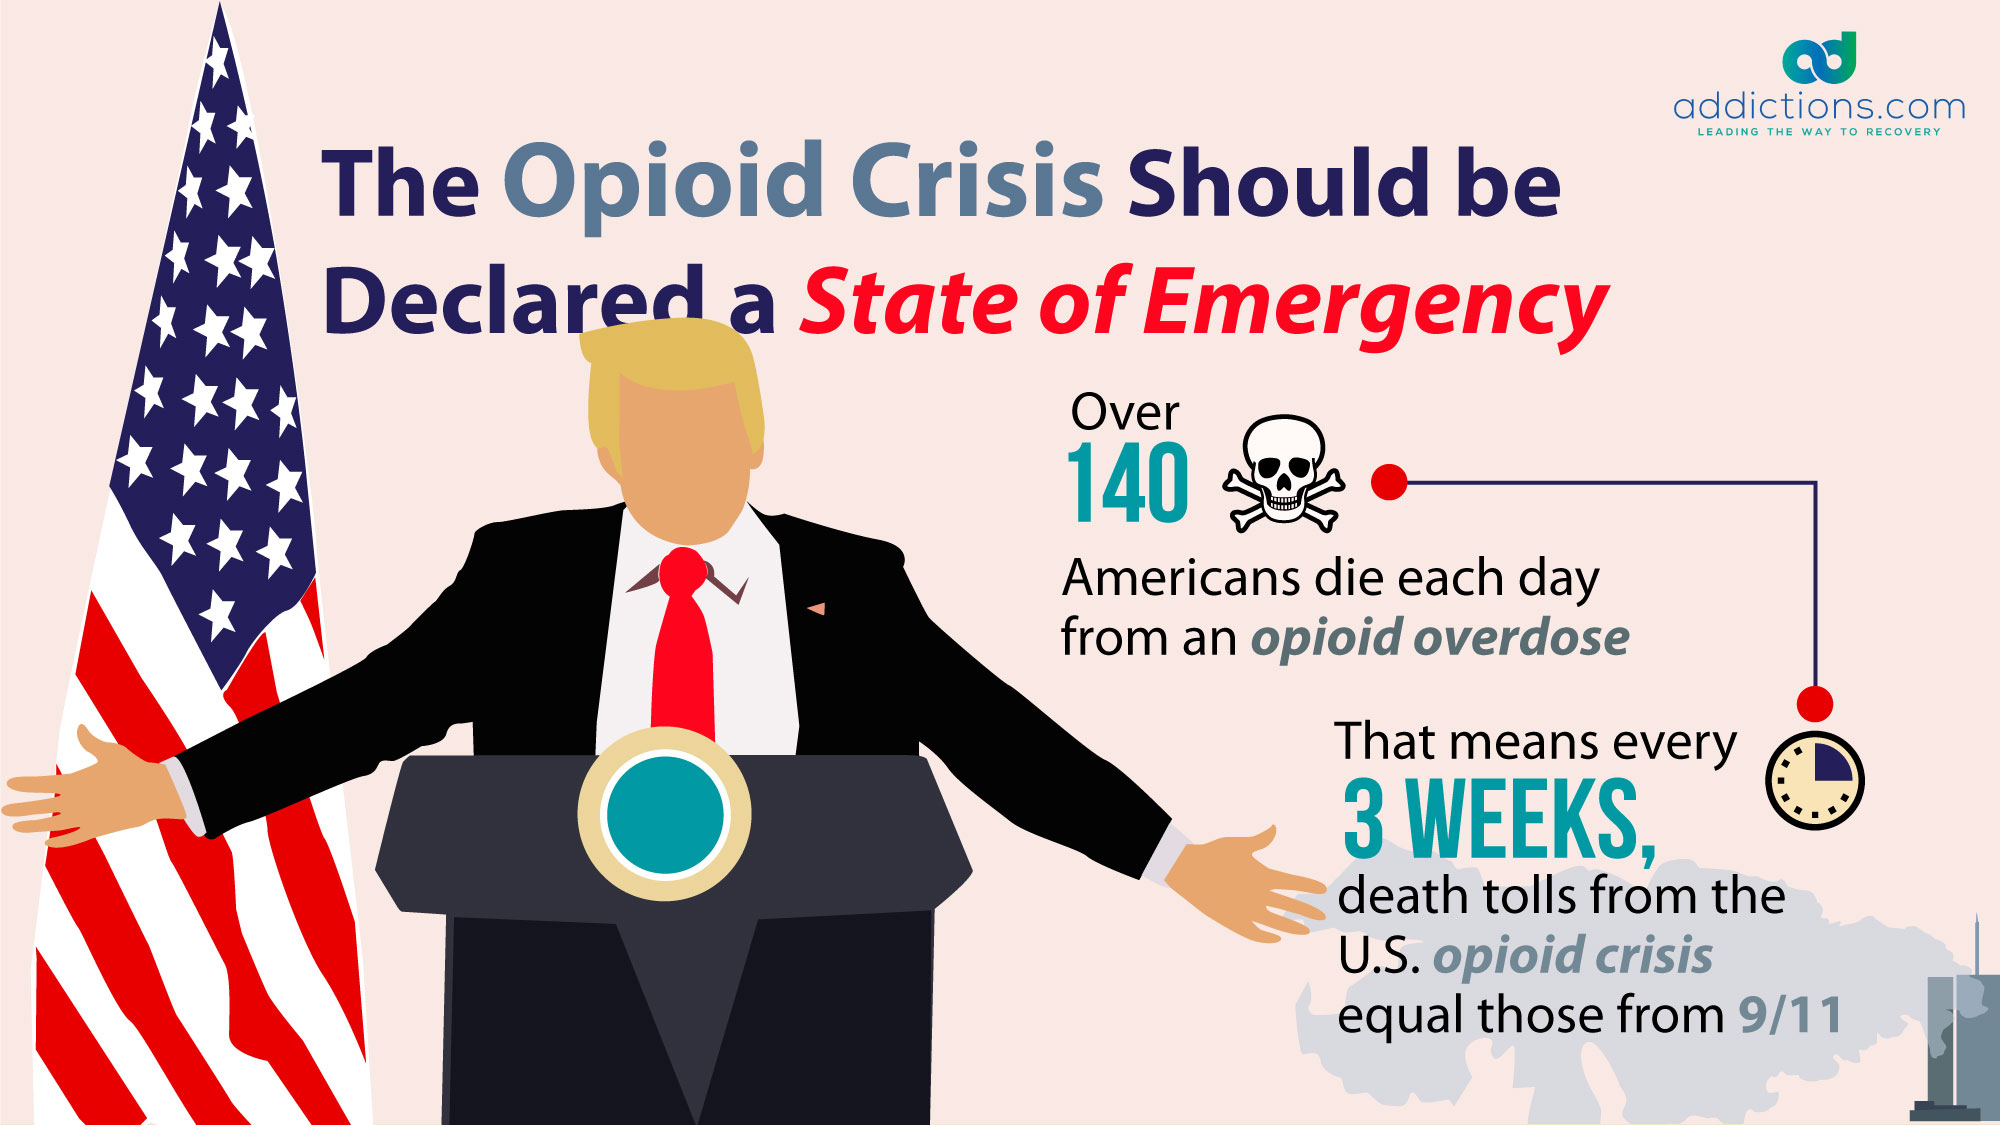 Infographic: President Trump declared the U.S. opioid epidemic a public health emergency